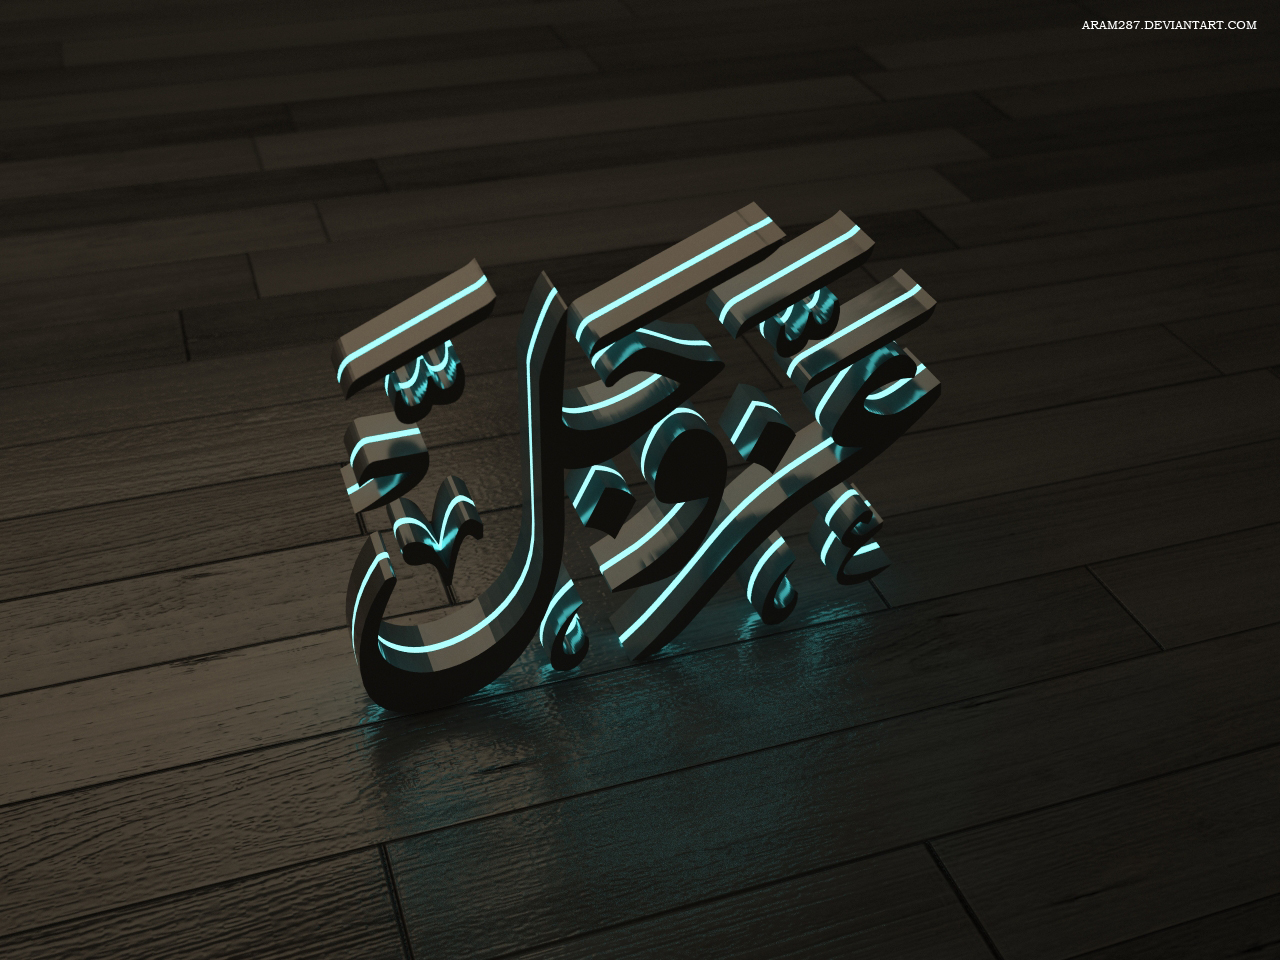 15 Beautiful And Colourful 3D Islamic Wallpapers To Download Free